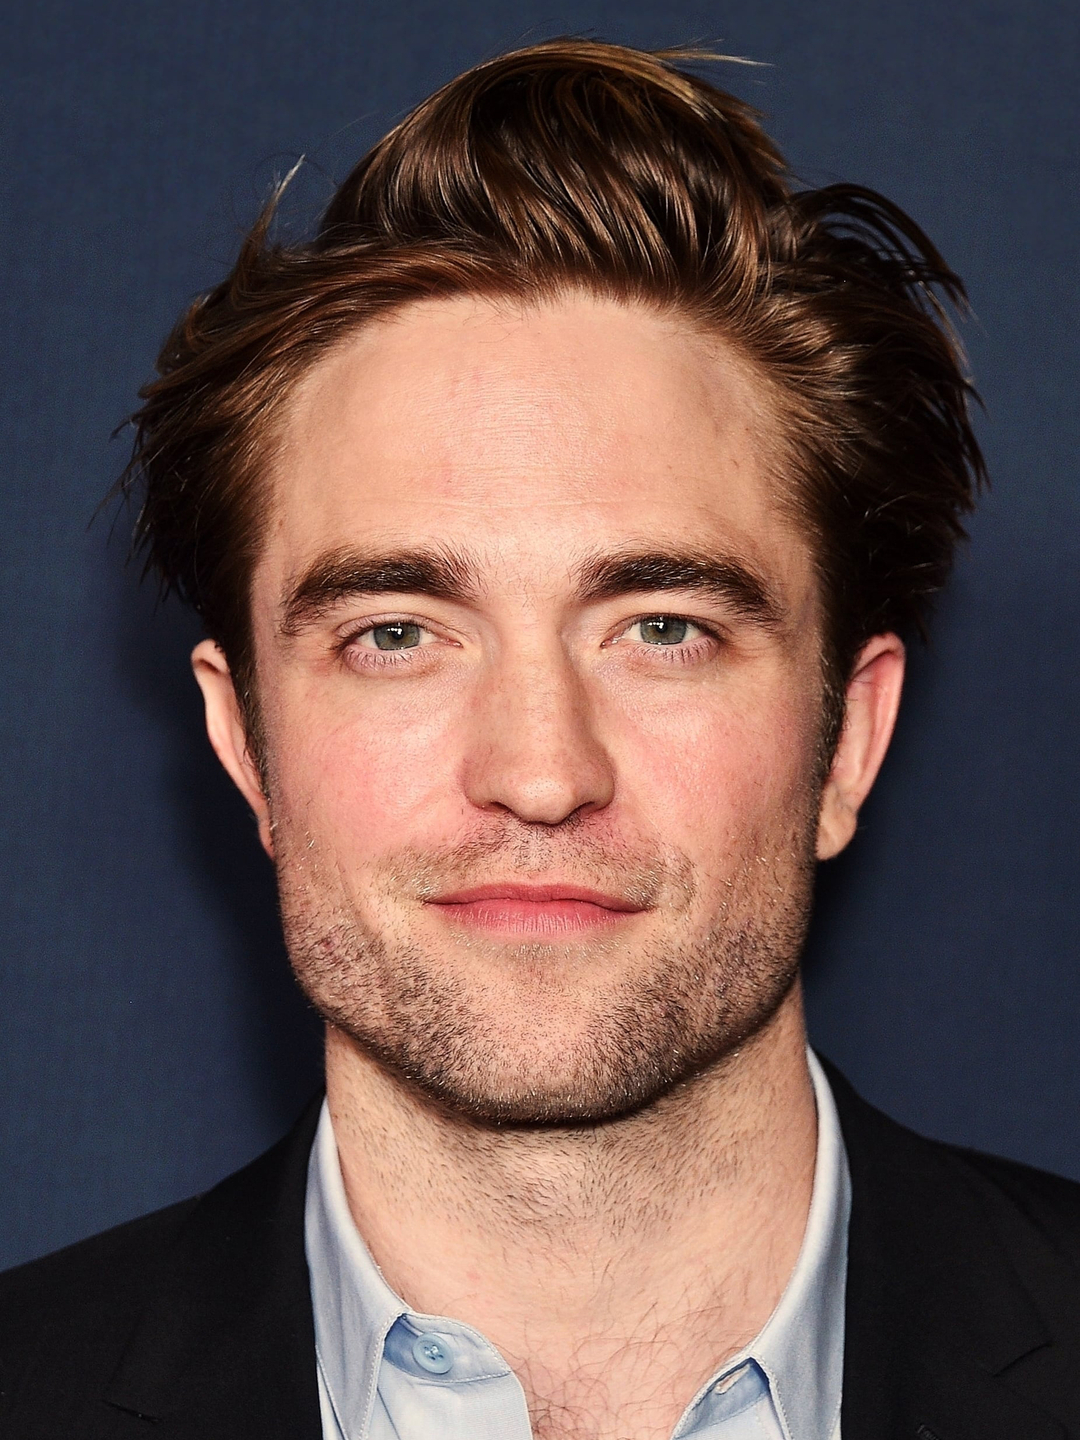 Robert Pattinson who are his parents